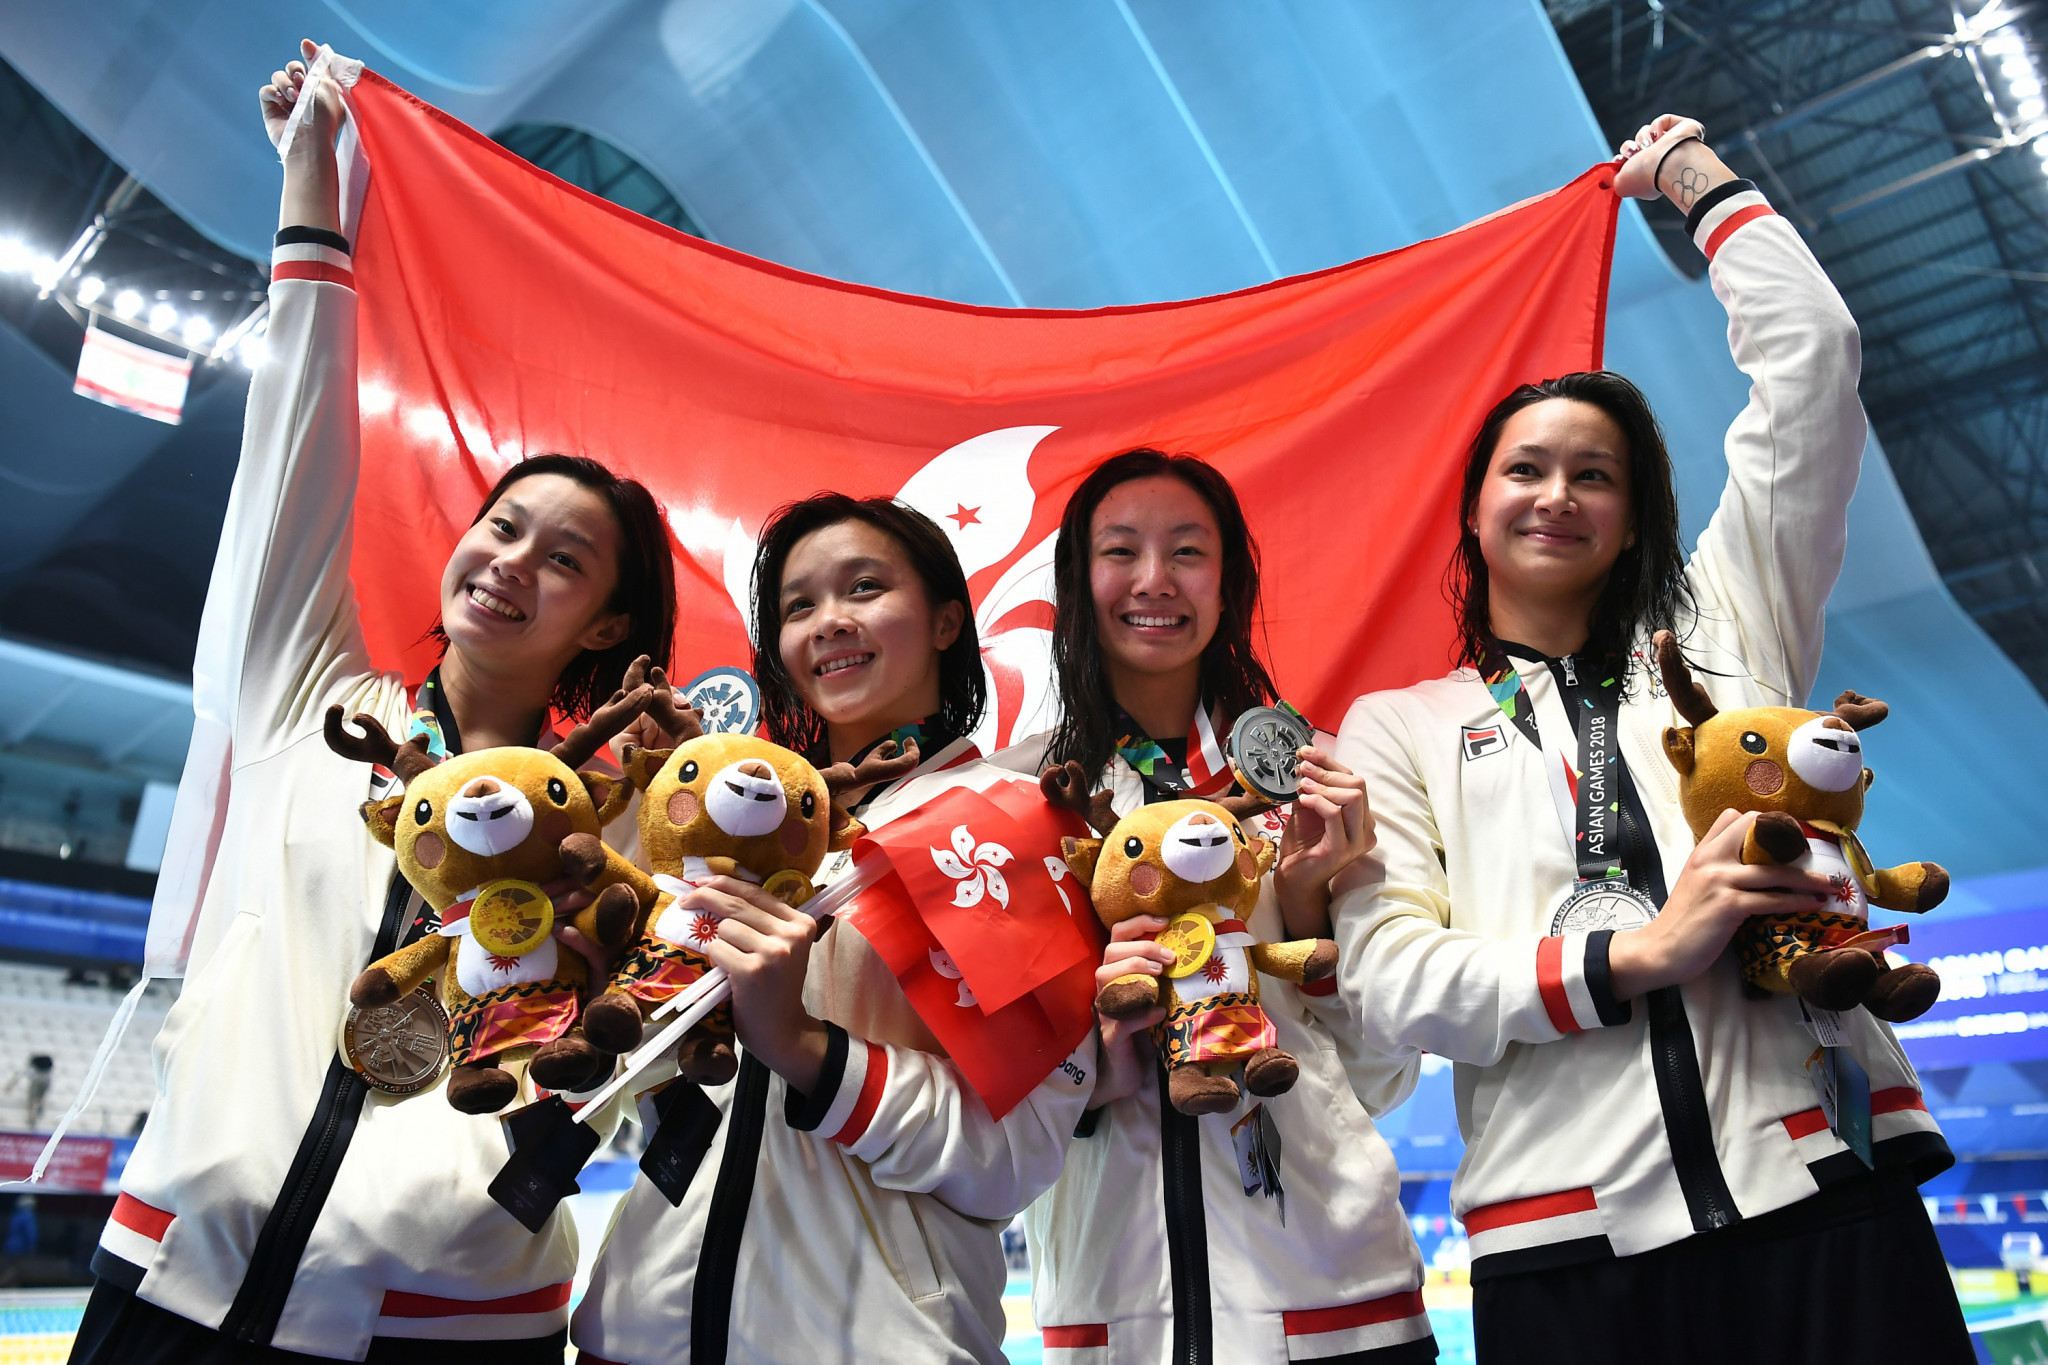 Hong Kong earned silver in the women's 4x100 metre medley relay at the 2018 Asian Games ©Getty Images